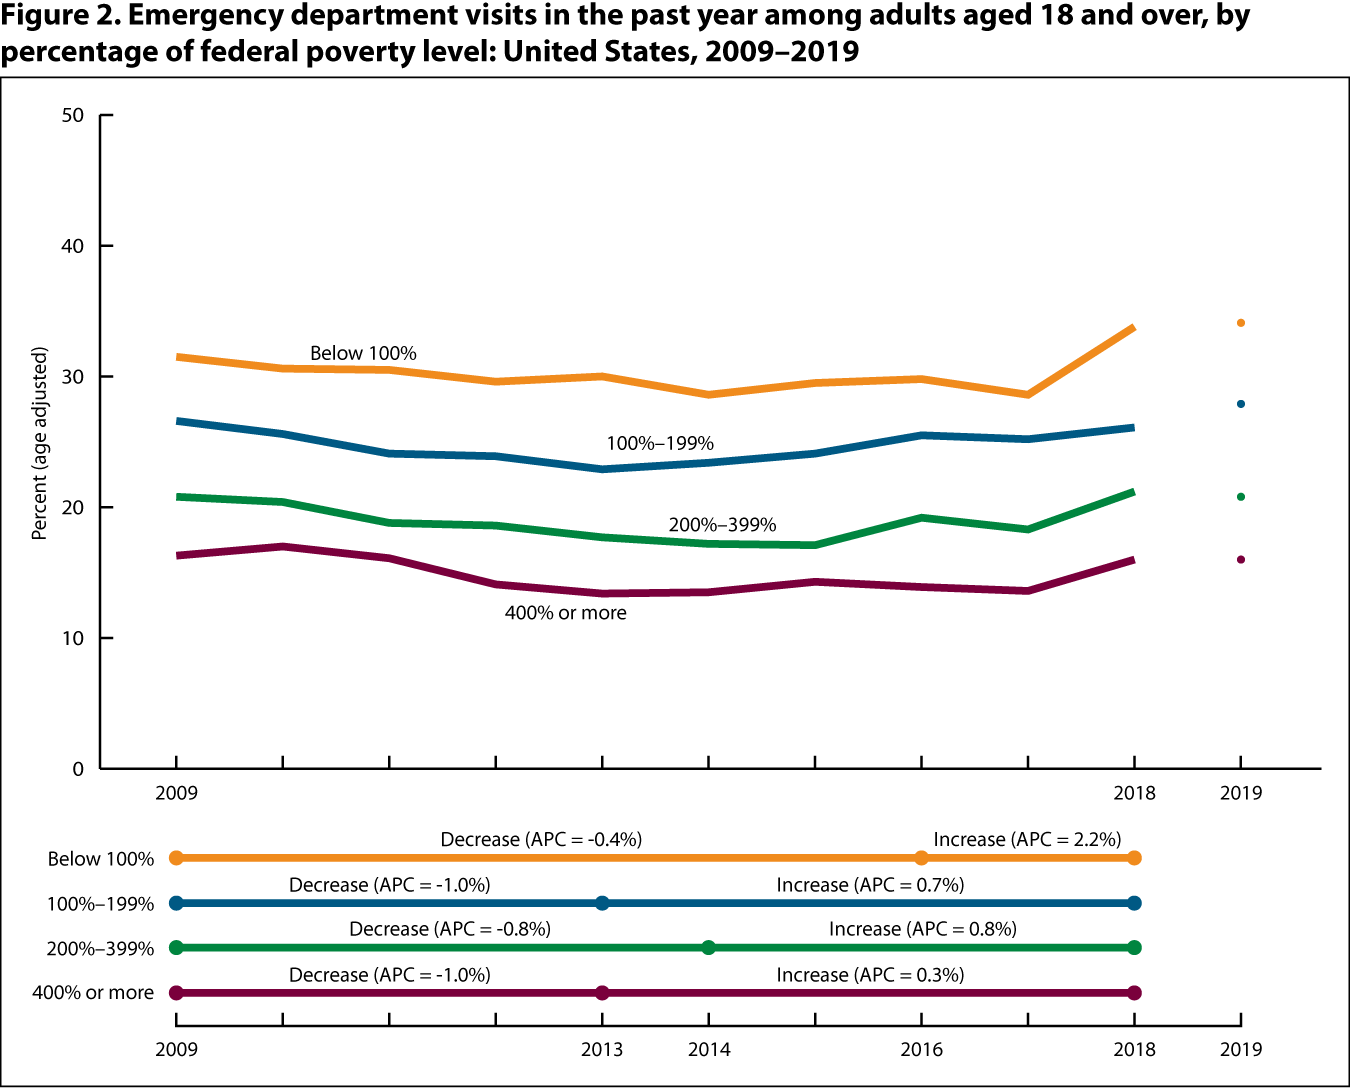 Figure 2 is a line graph showing the percentage of adults aged 18 and over with an emergency department visit in the past year, by percentage of federal poverty level for 2009 through 2018 (line) and at 2019 (point).